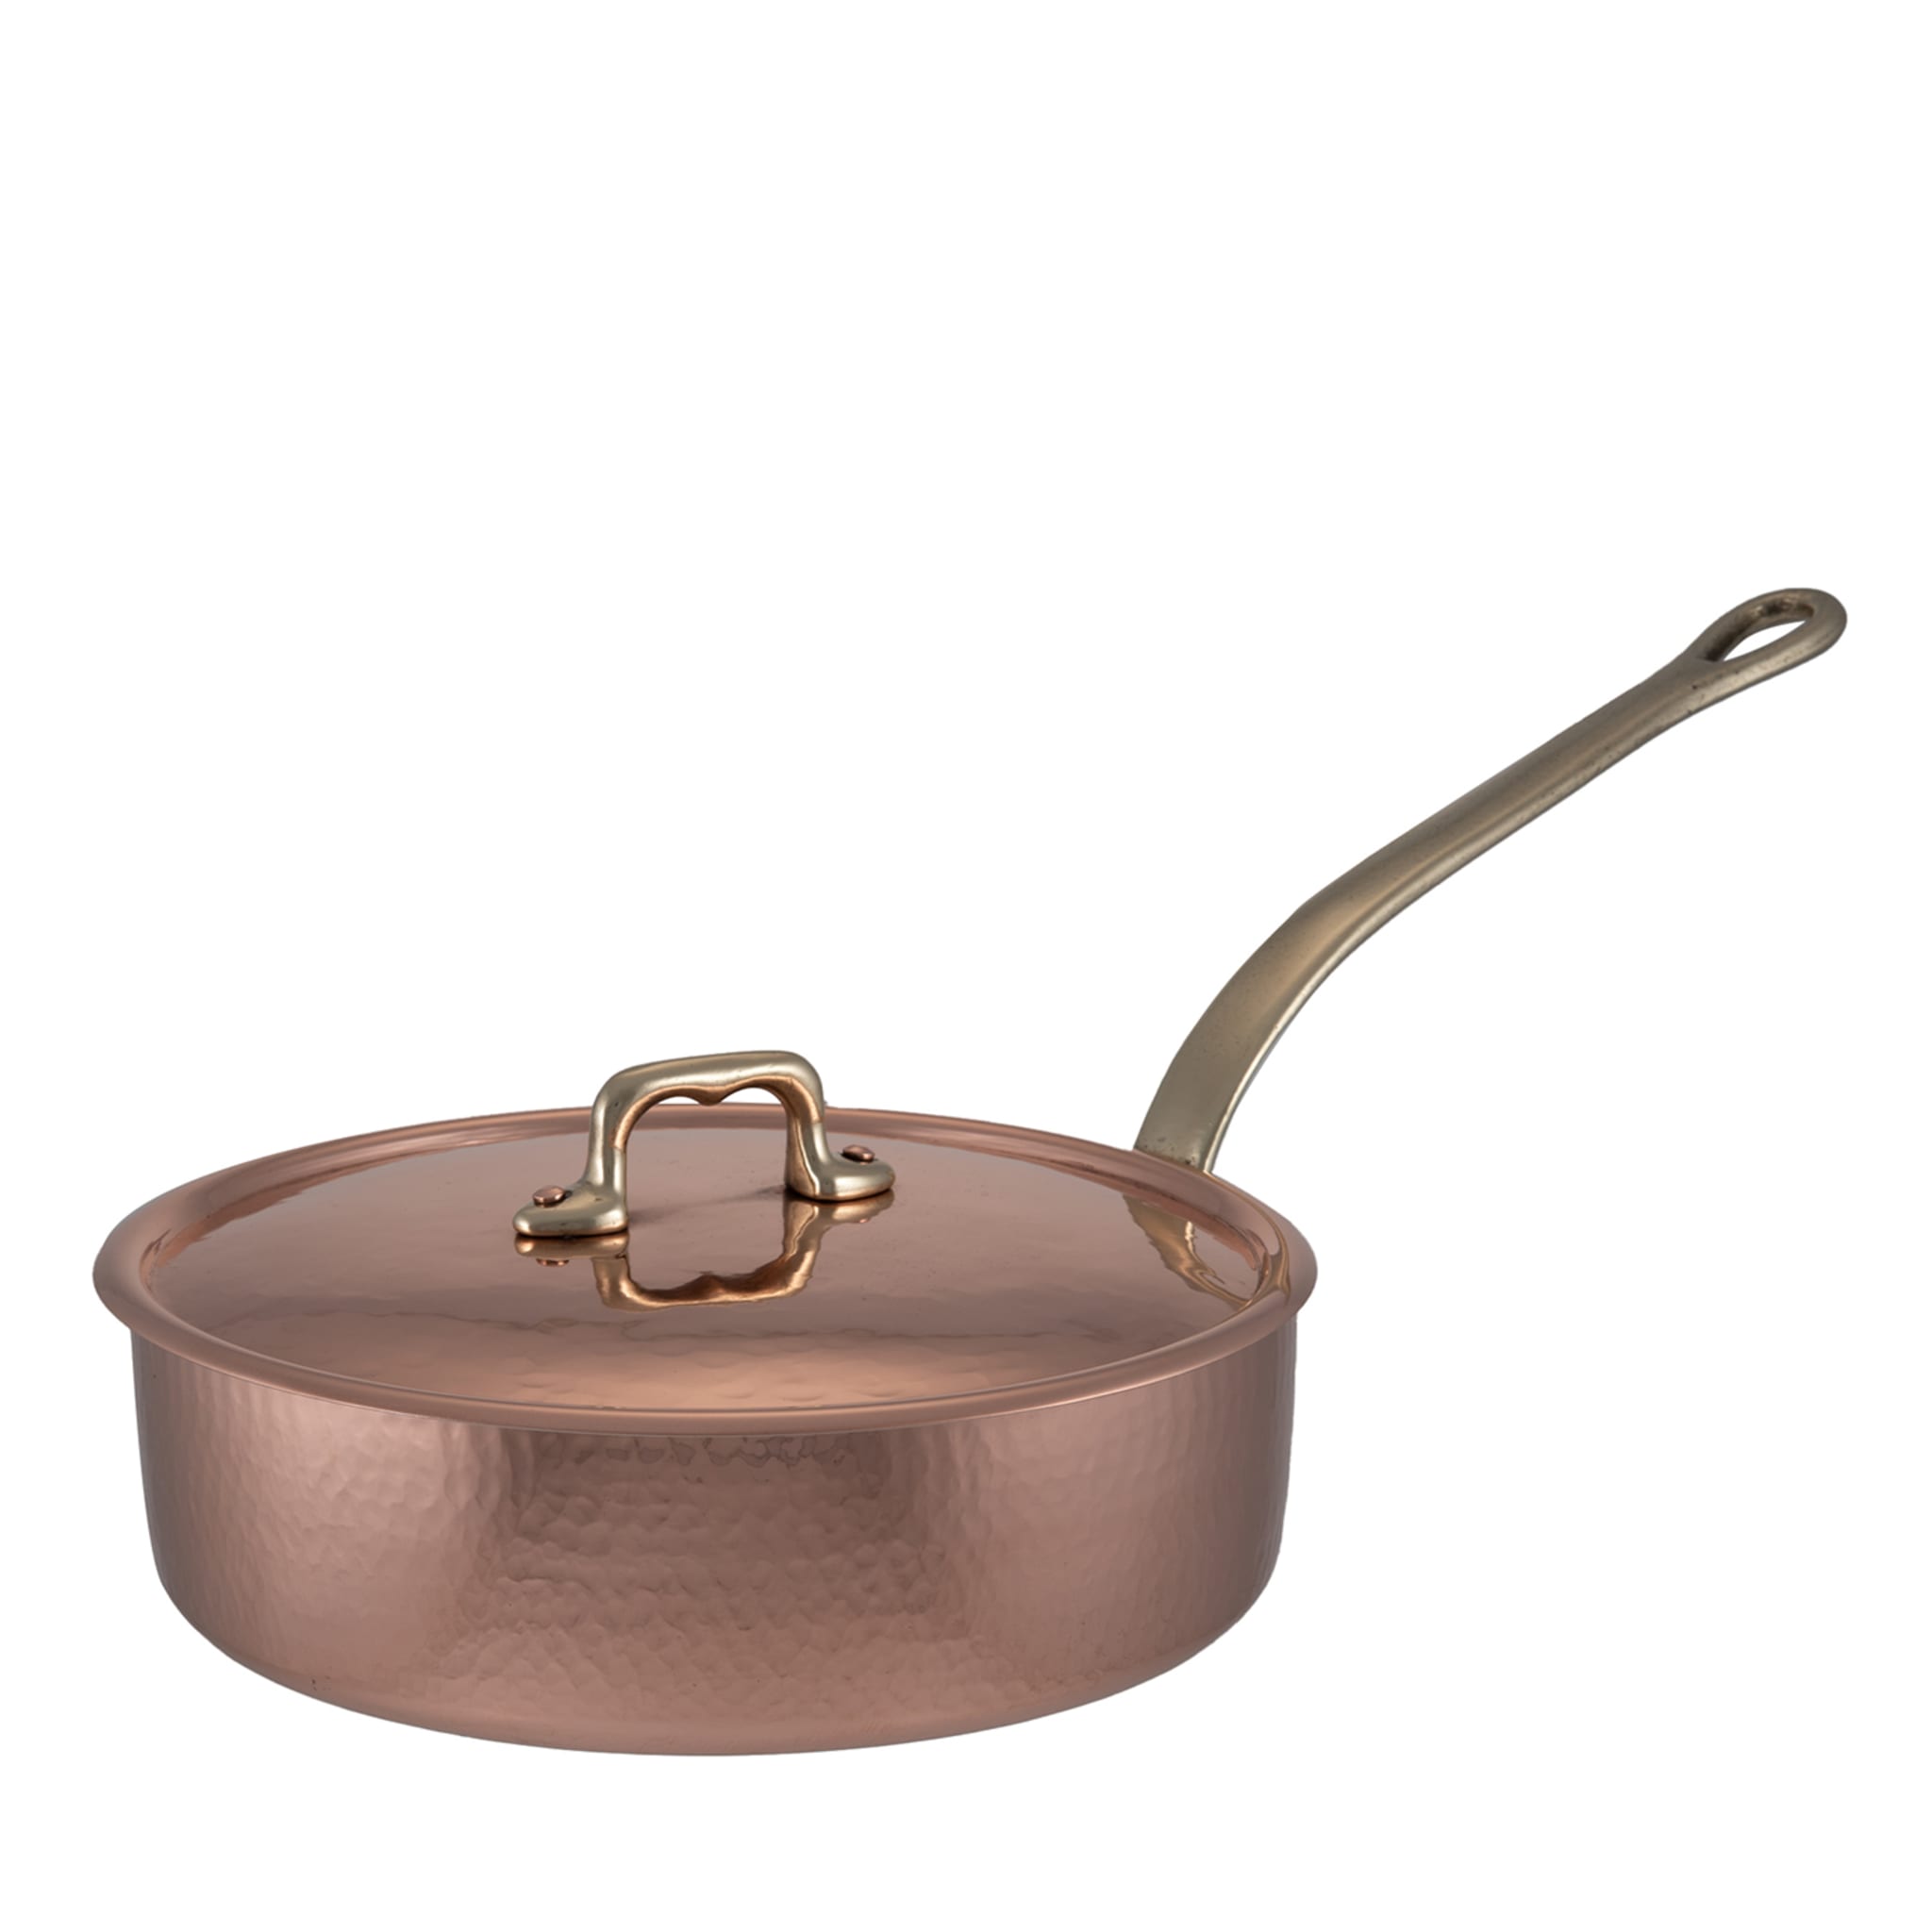 Copper Saucepan Dish with Lid - Main view